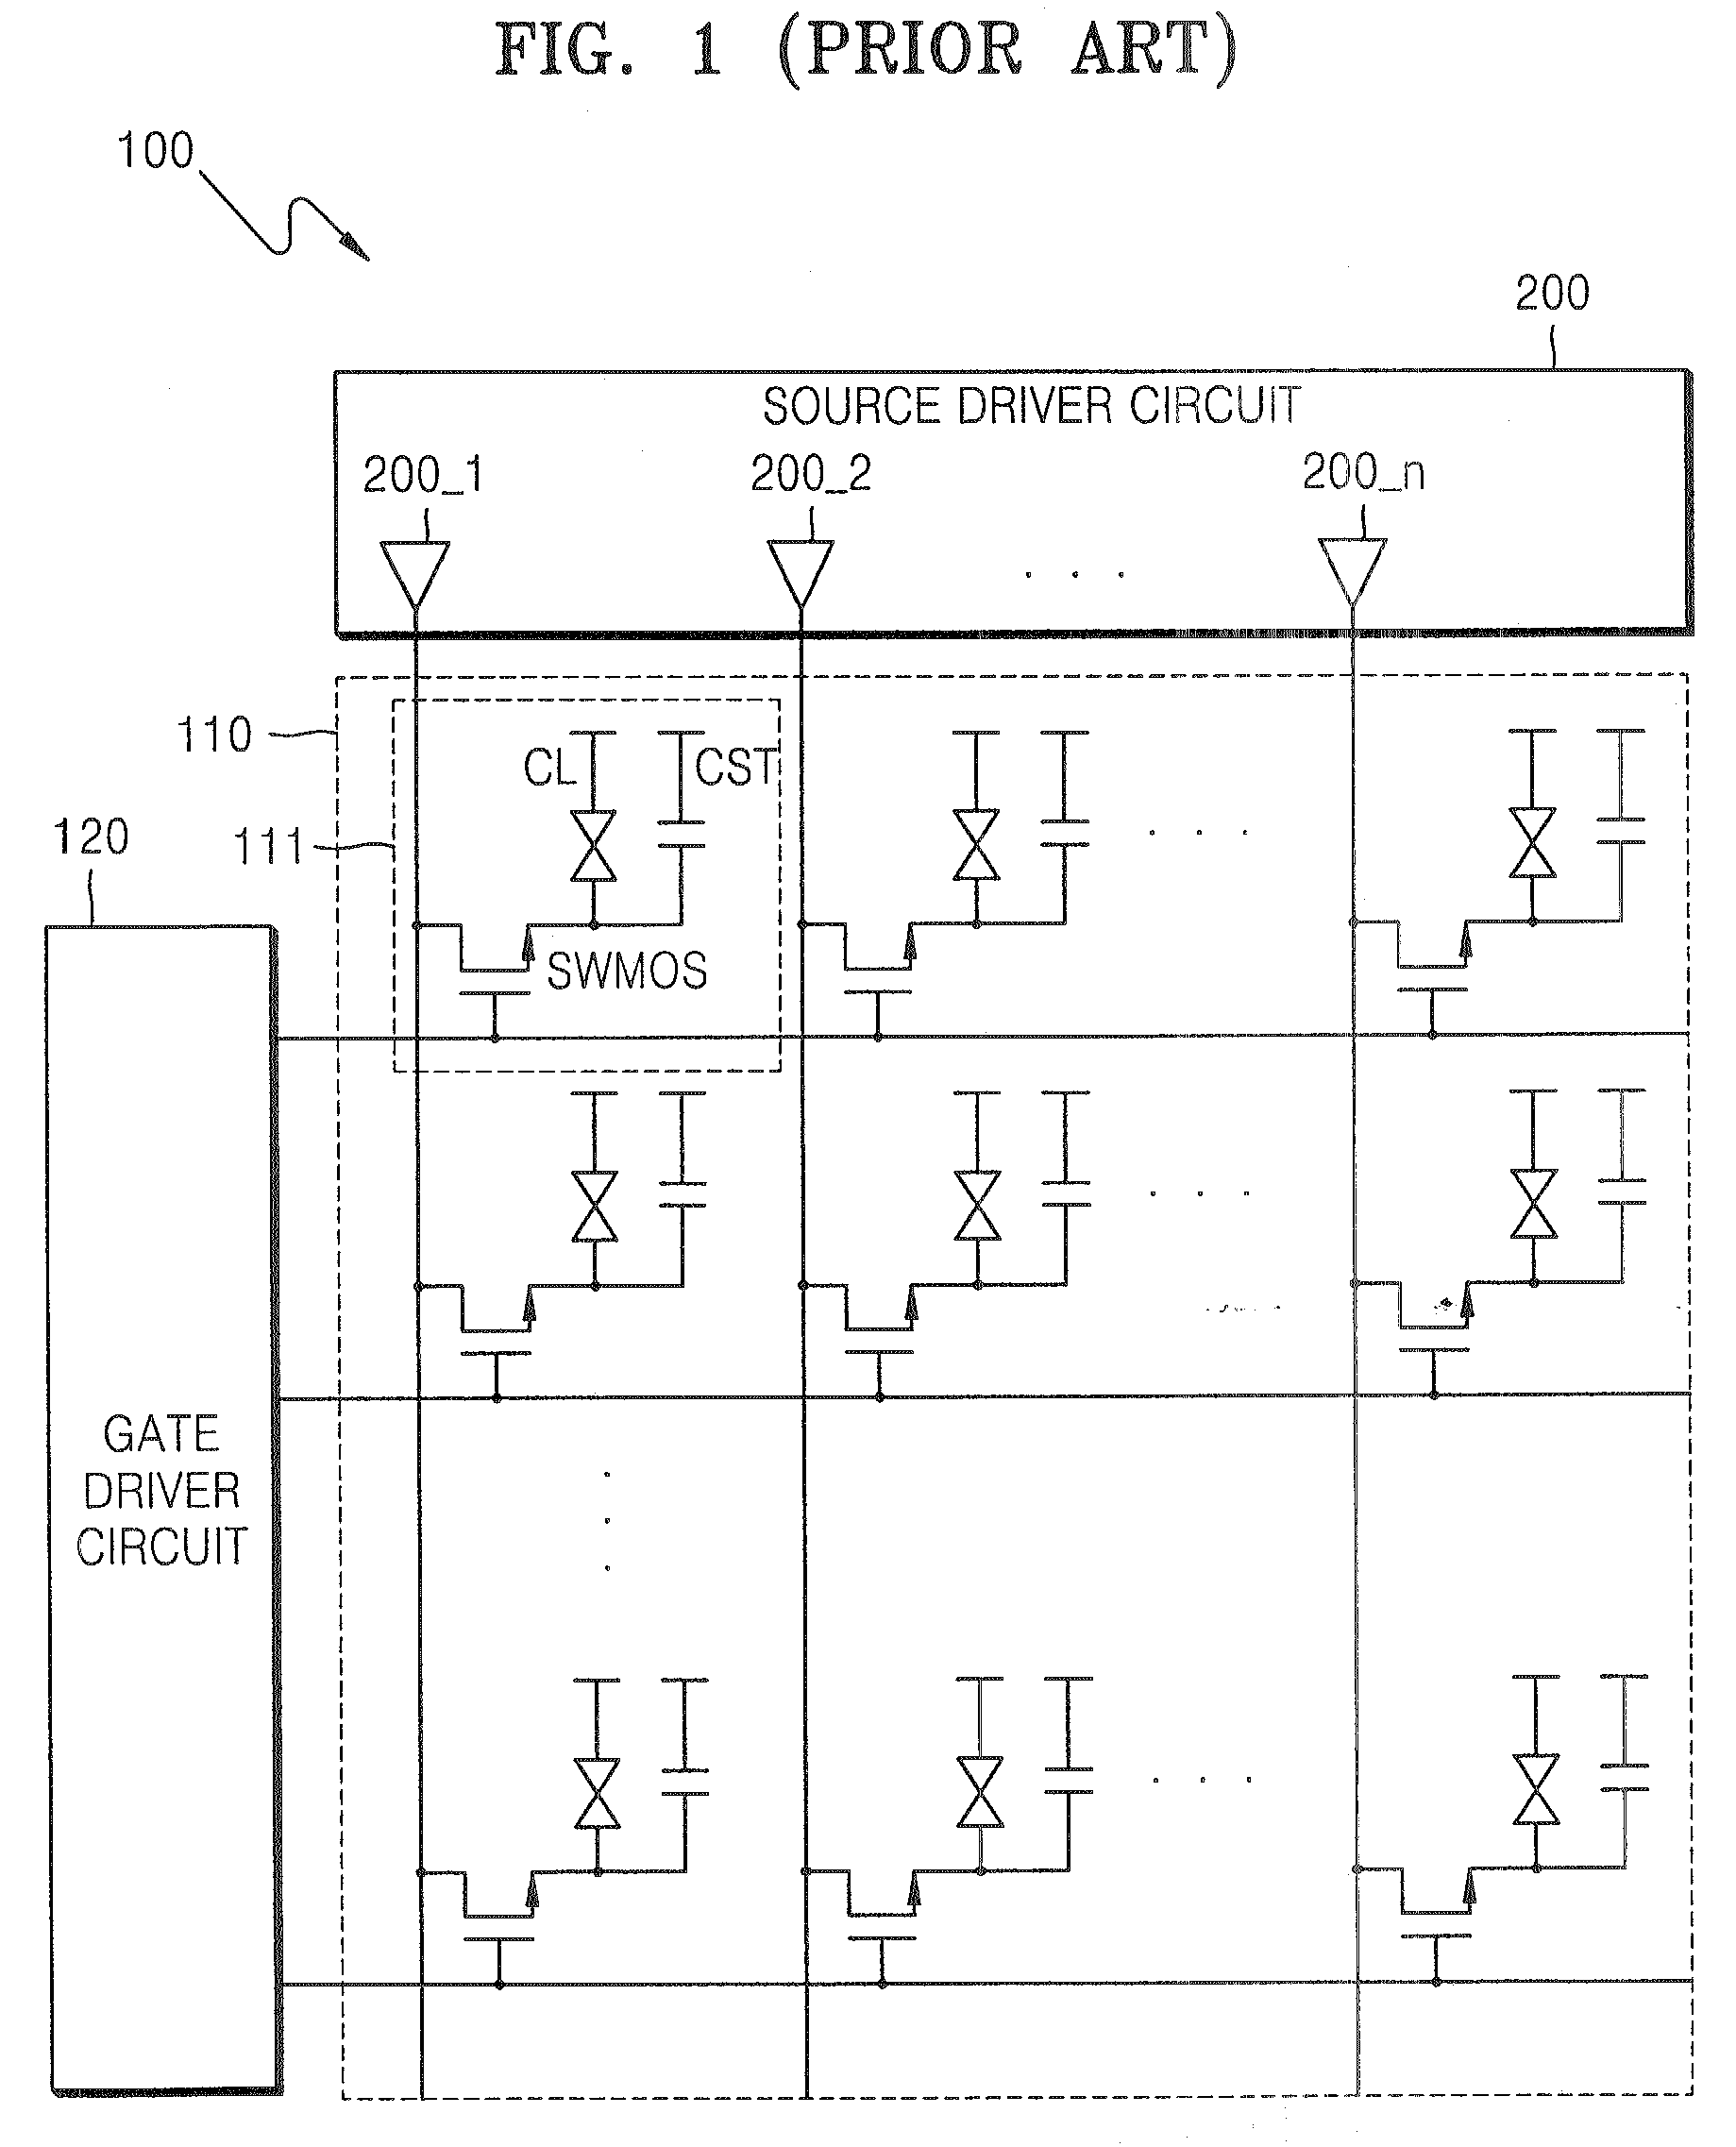 Source driver circuit for controlling slew rate according to frame frequency and method of controlling slew rate according to frame frequency in the source driver circuit